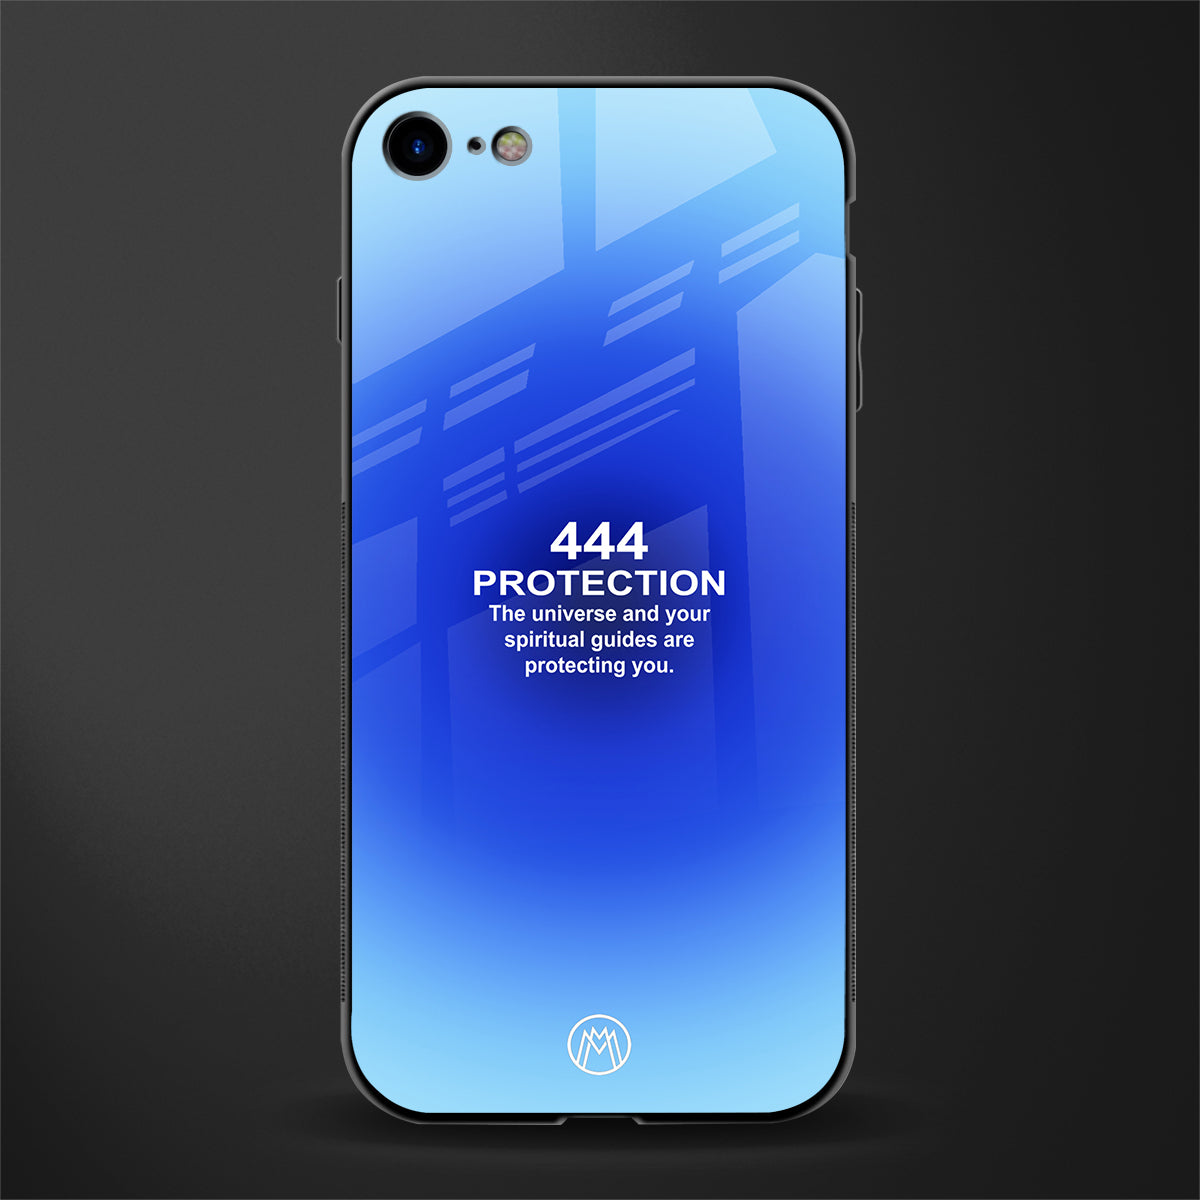 444 protection glass case for iphone 7 image